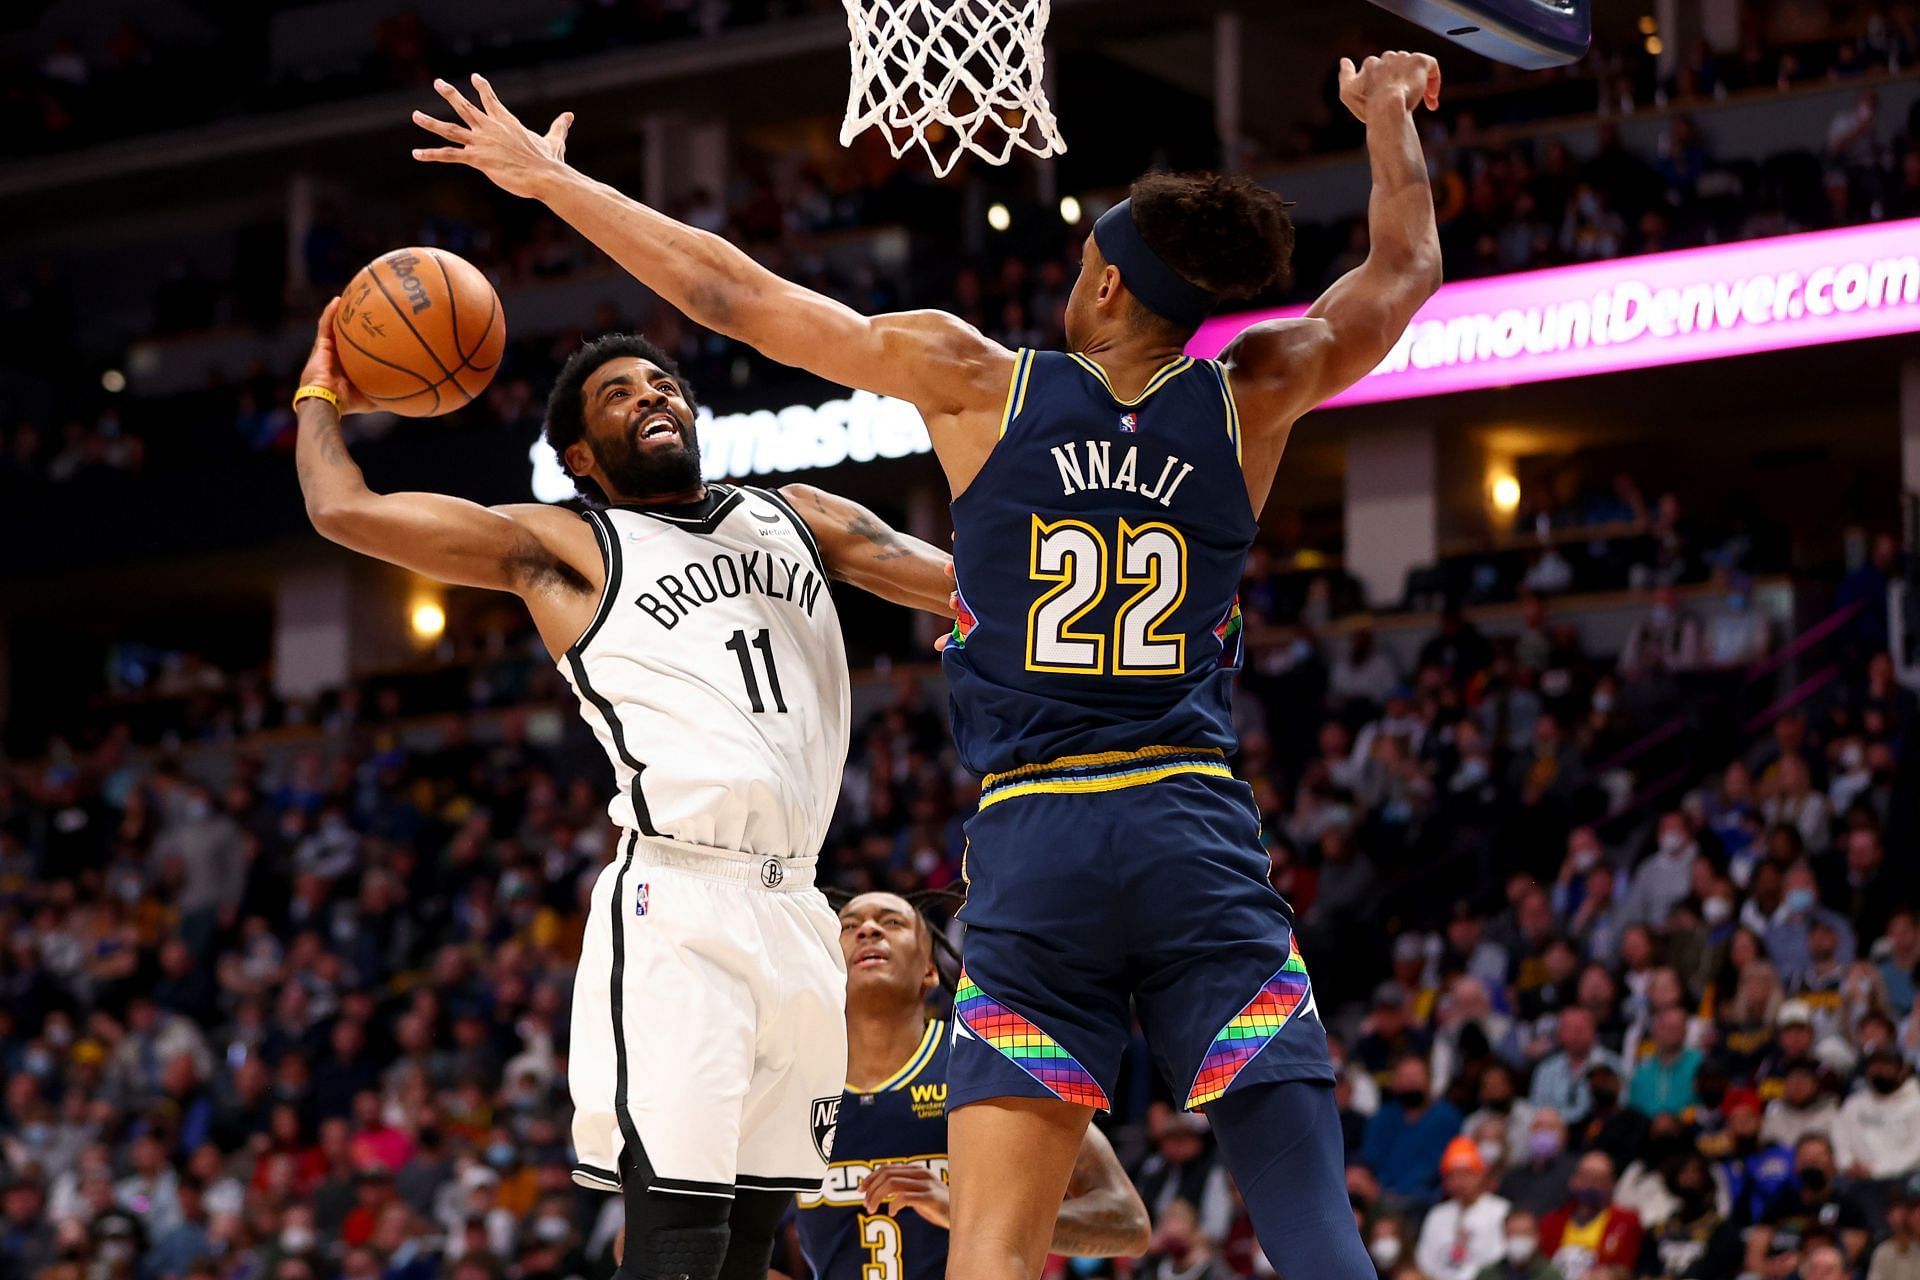 yrie Irving #11 of the Brooklyn Nets drives against Zeke Nnaji #22 of the Denver Nuggets at Ball Arena on February 6, 2022 in Denver, Colorado.